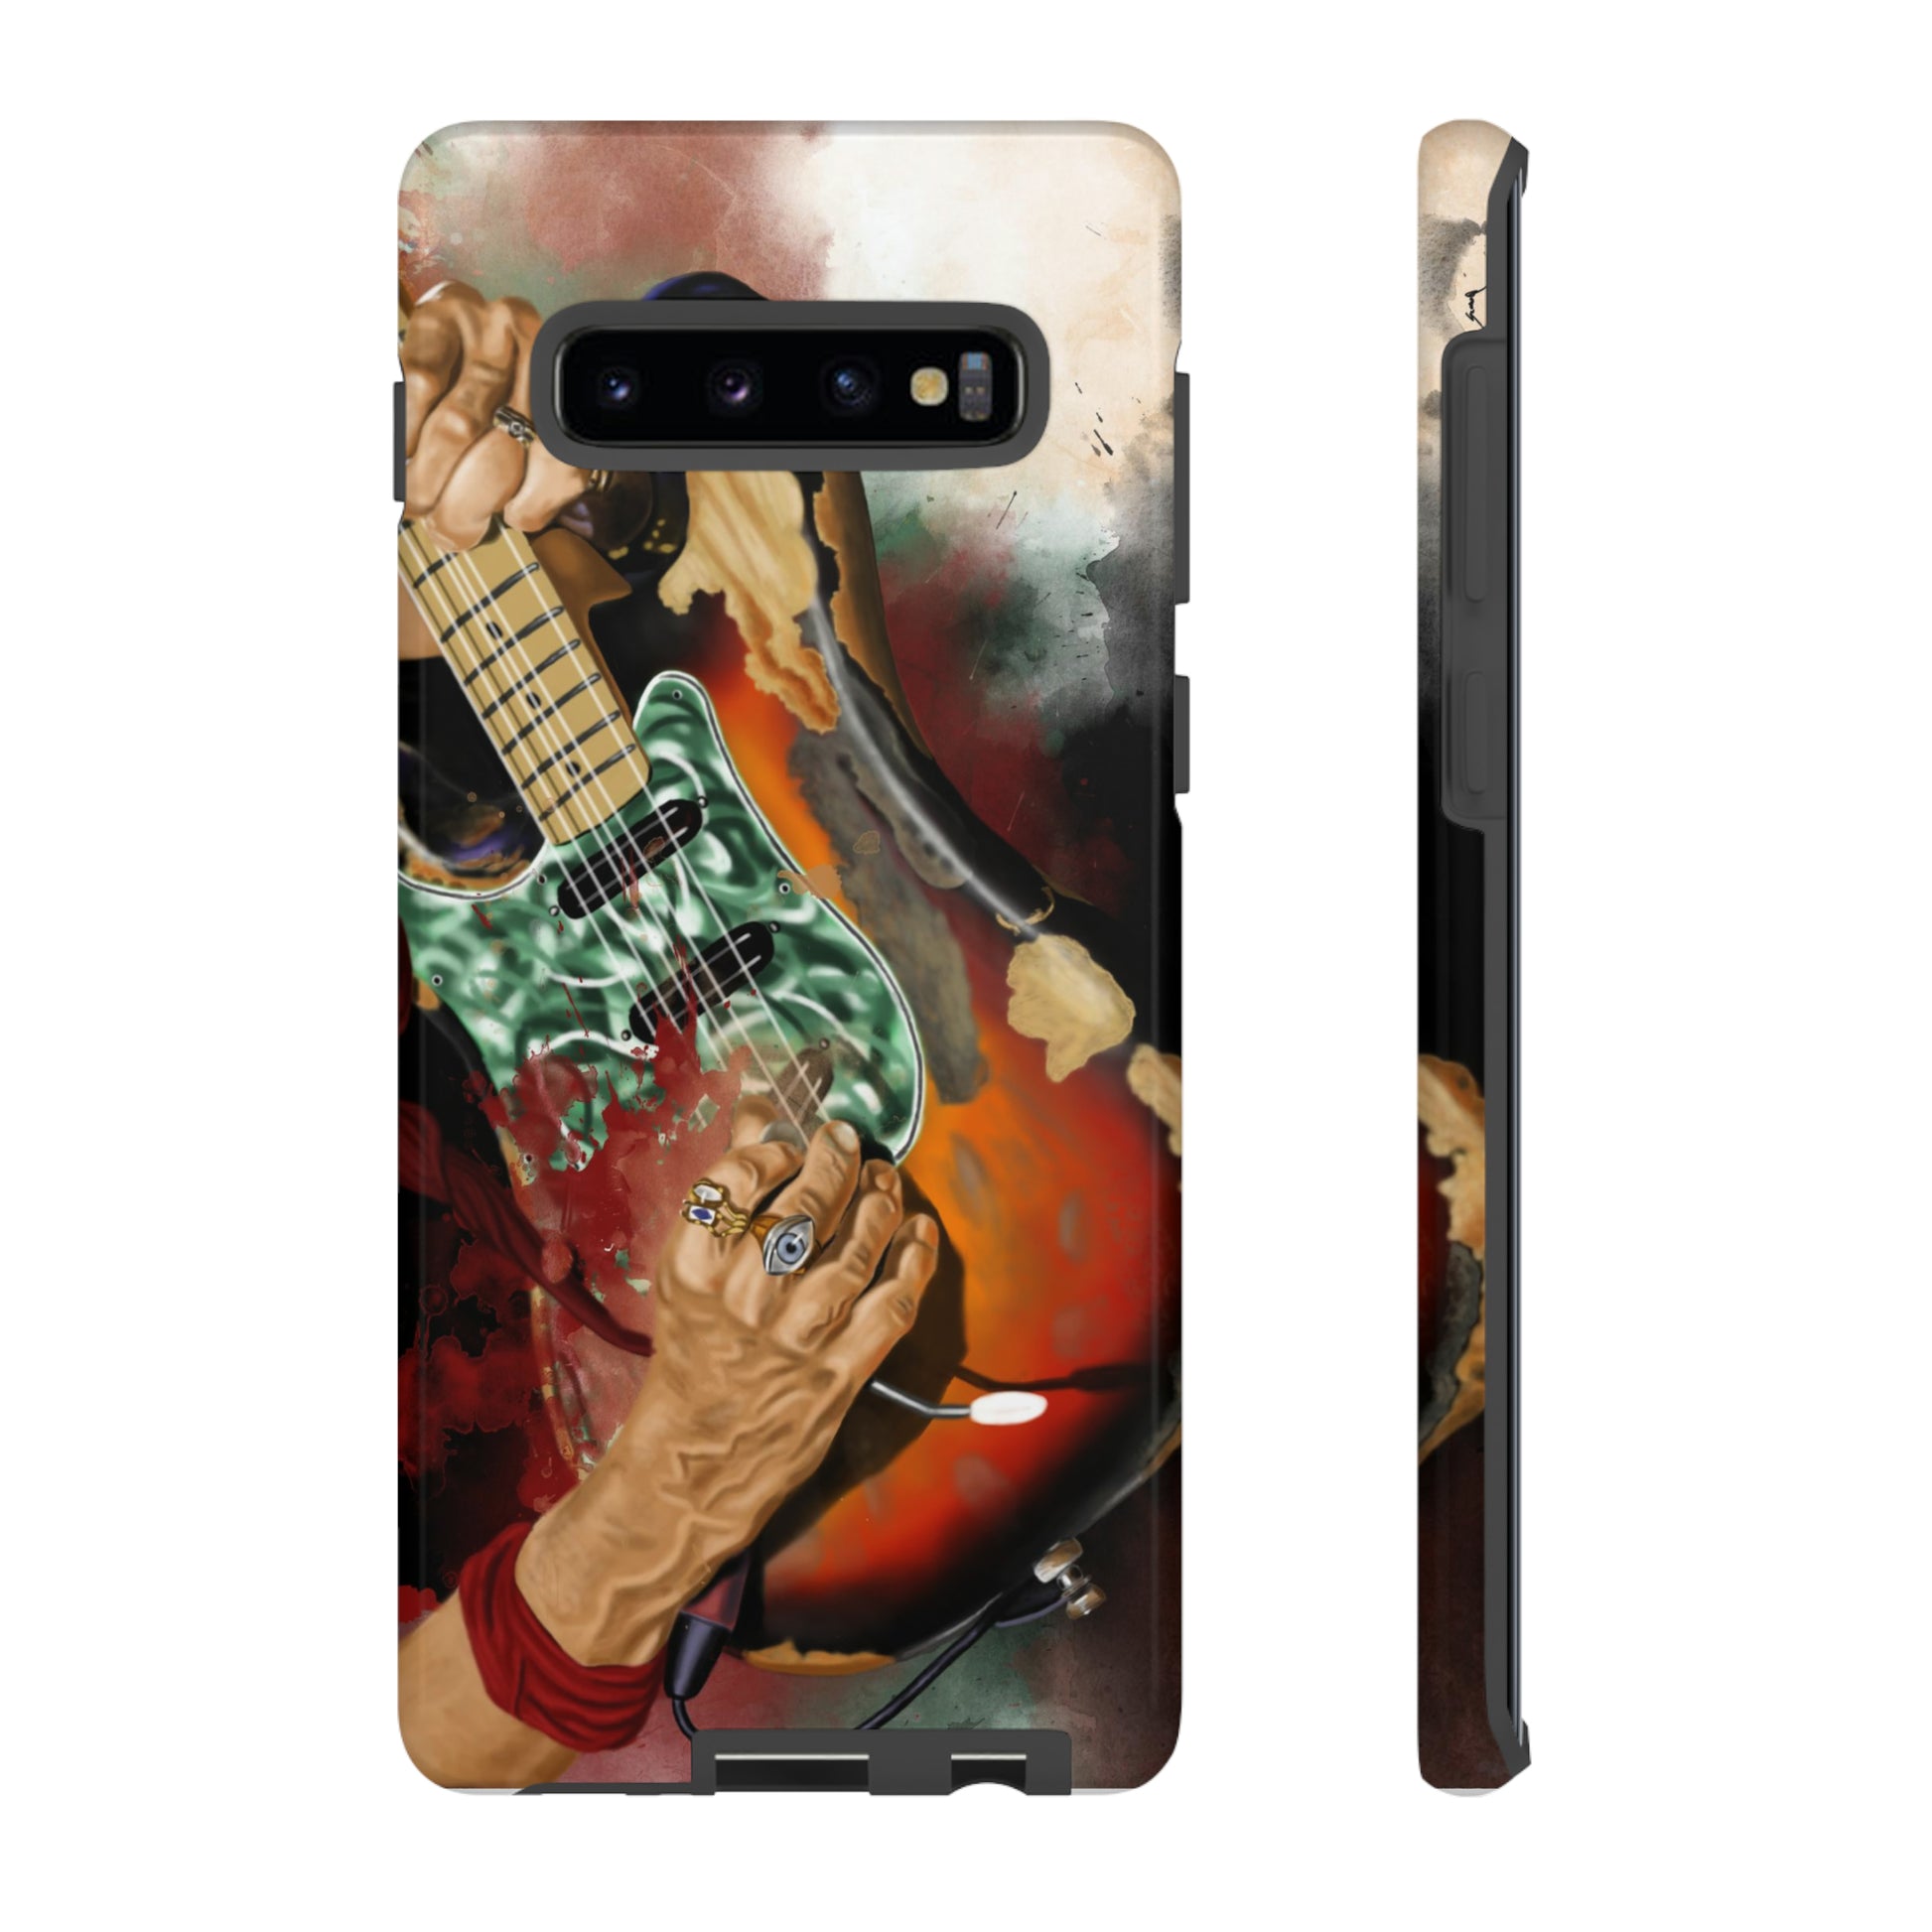 Digital painting of vintage electric guitar with hands printed on samsung phone case